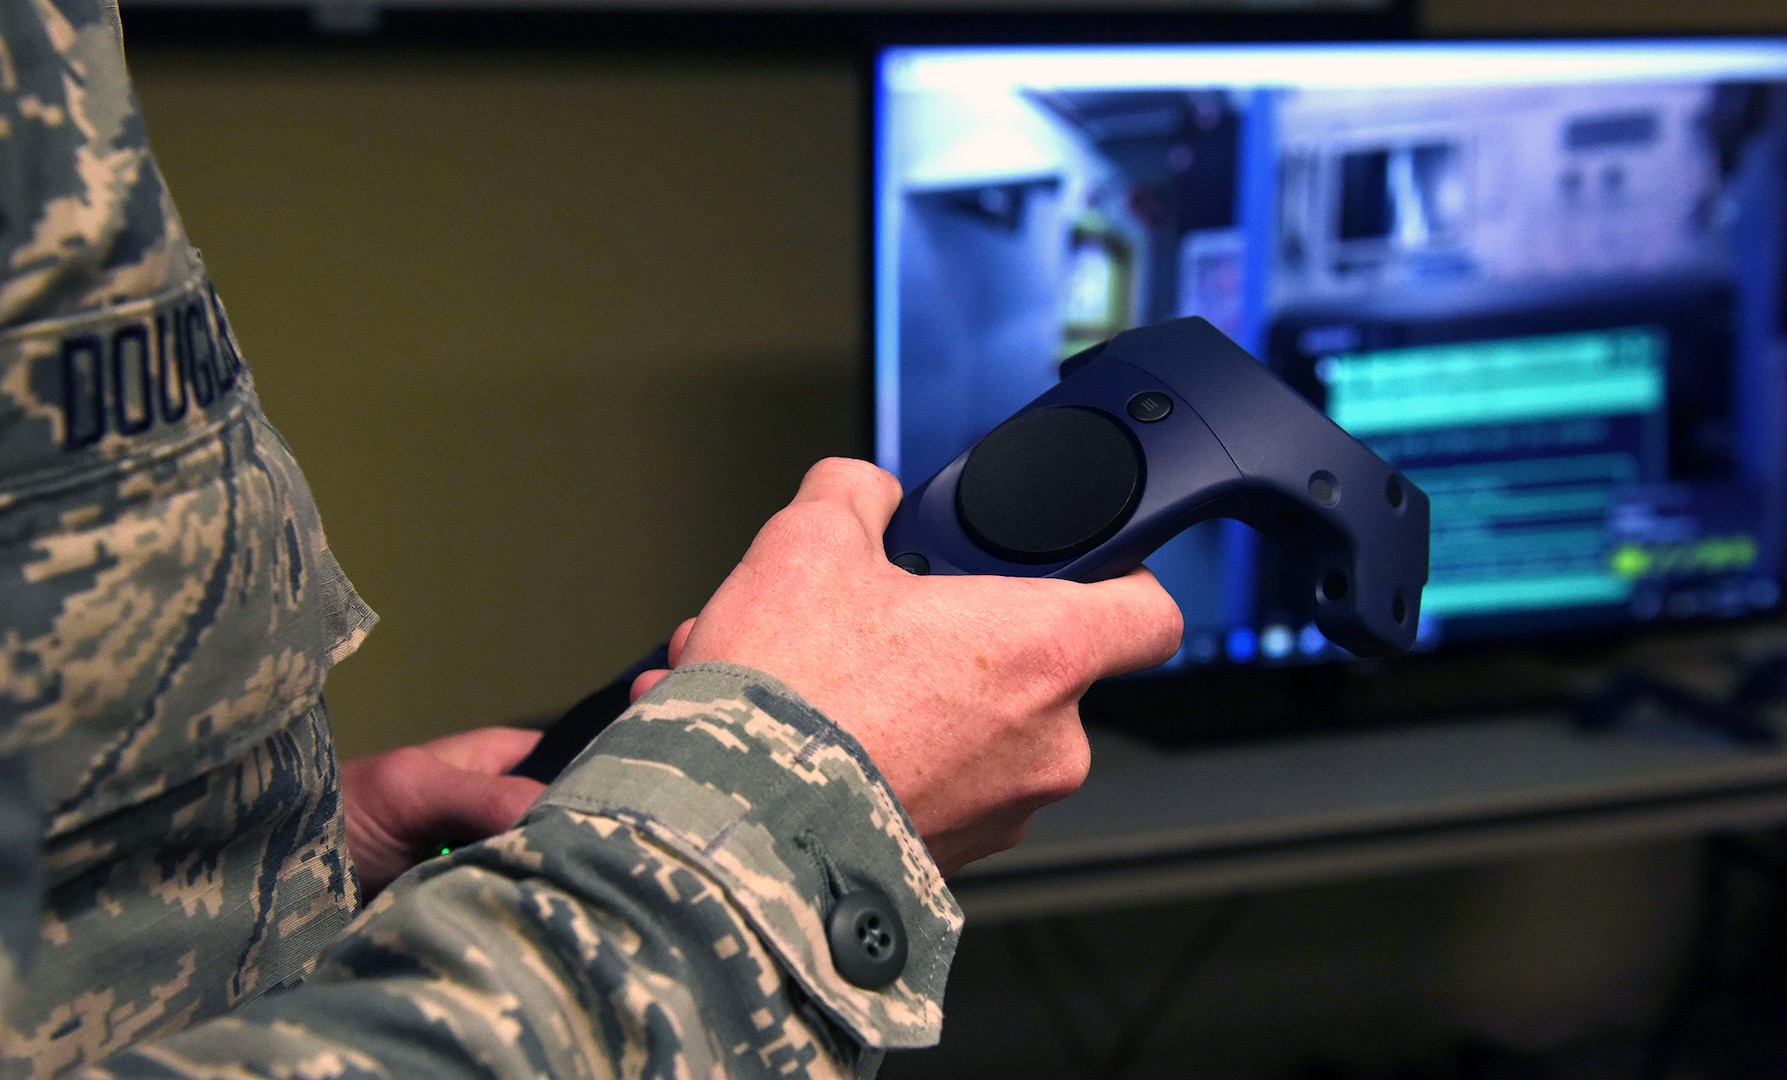 An Airman from the 19th Aircraft Maintenance Squadron communications navigation flight operates a virtual reality controller to complete a scenario May 2, 2019, at Little Rock Air Force Base, Arkansas. Members from the 344th Training Squadron, Joint Base San Antonio-Lackland, came to Little Rock Air Force Base to showcase Integrated Technology Platform, initiative to train students with a virtual reality program called Virtual Hangar. Students can navigate Virtual Hangar using controllers and headsets.